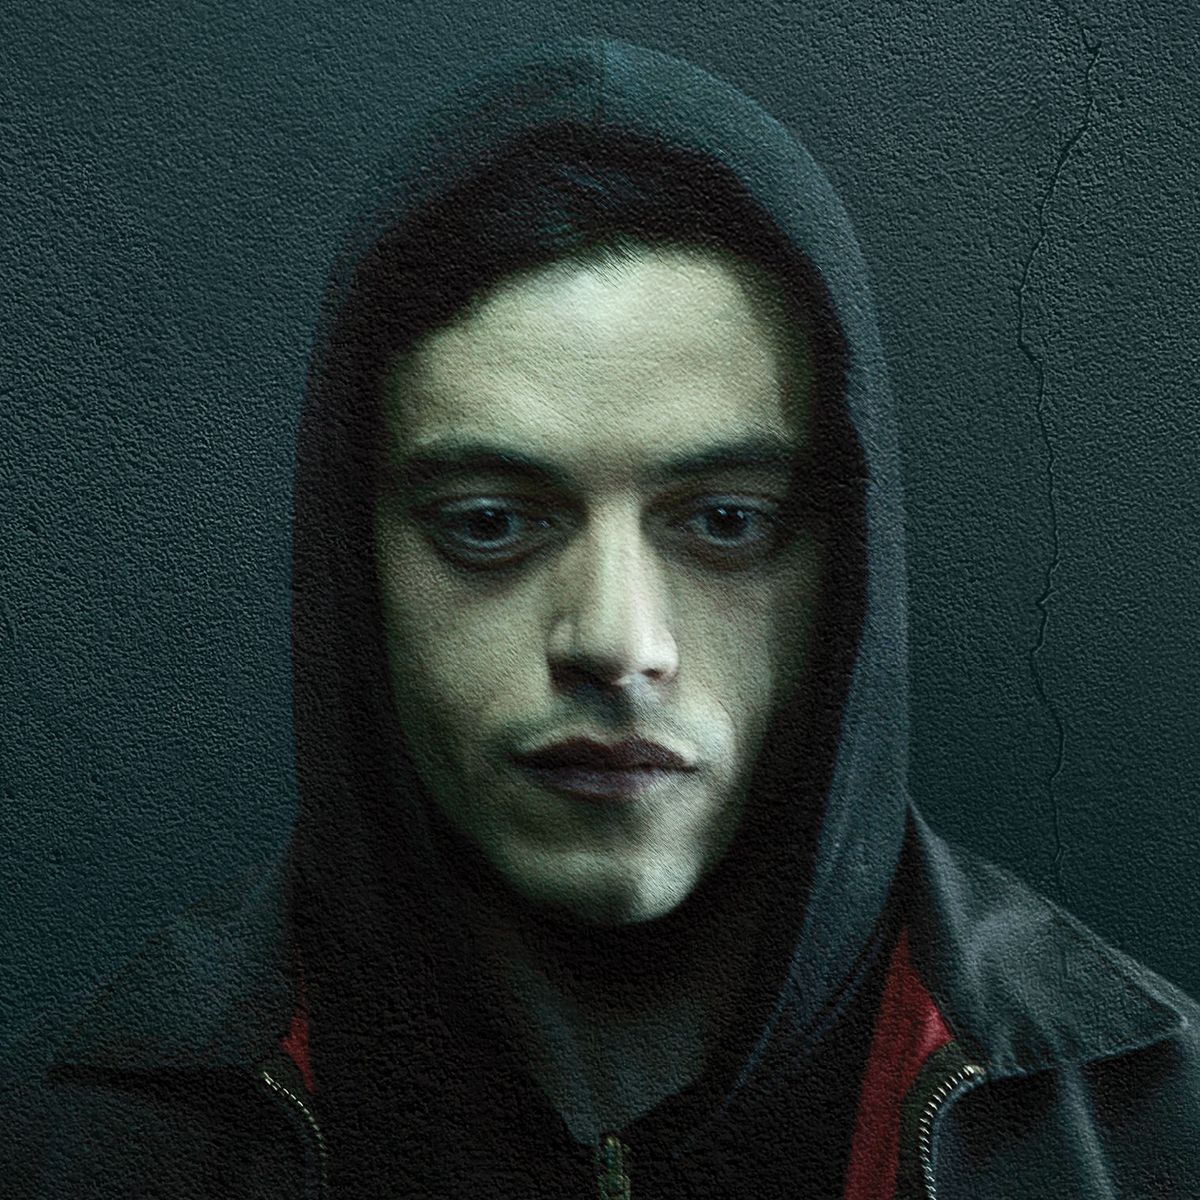 Fsociety Hacks USA Network's Mr. Robot FB Live Stream, Releases Season  Premiere as a GIFT